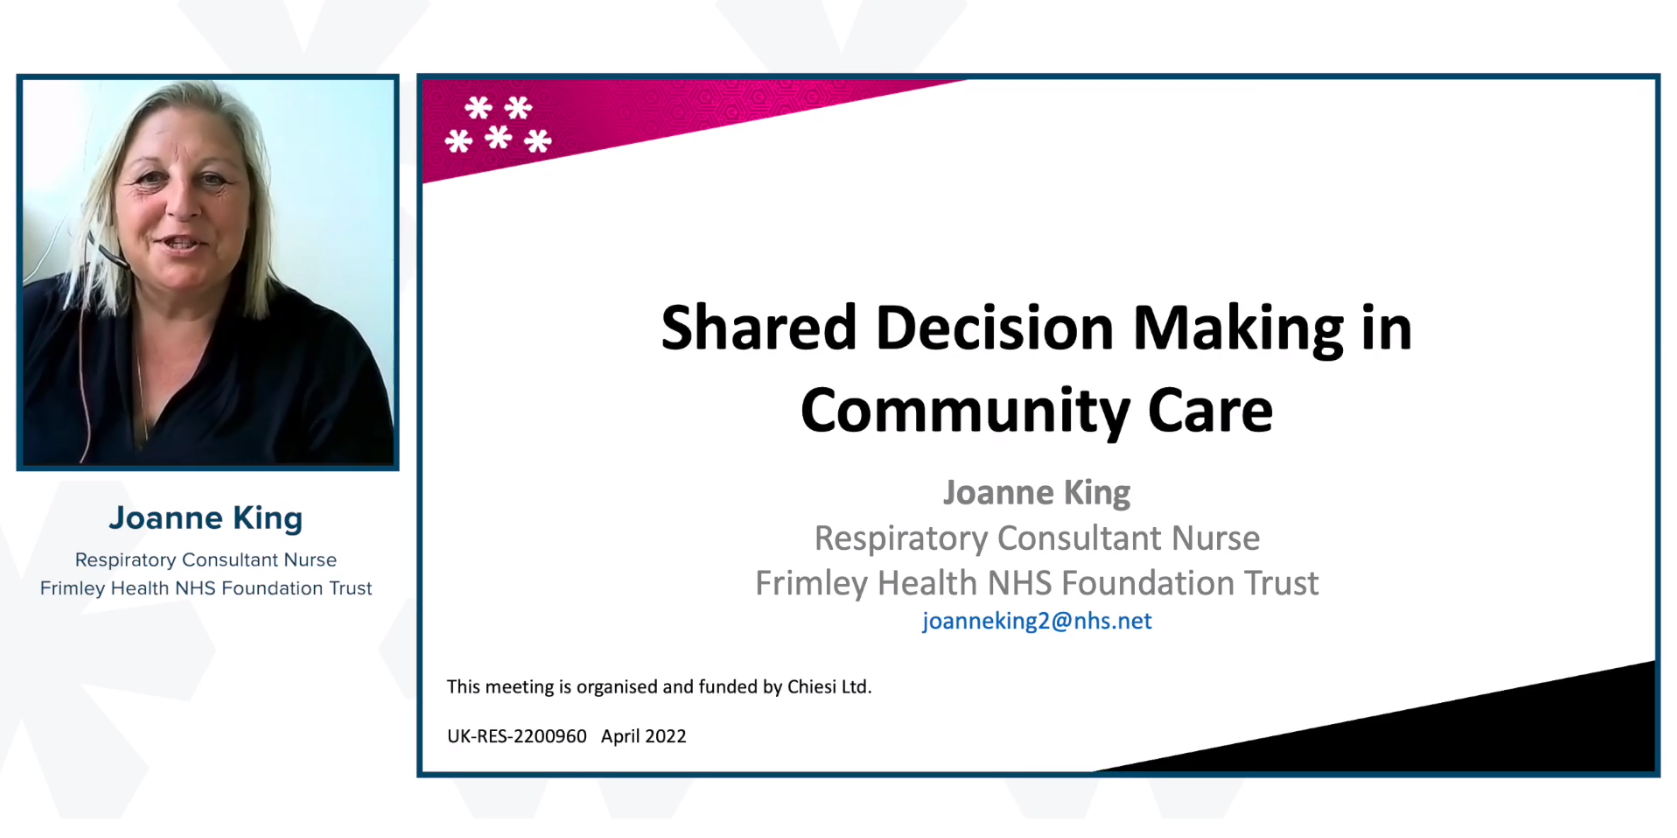 Shared Decision Making in Community Care